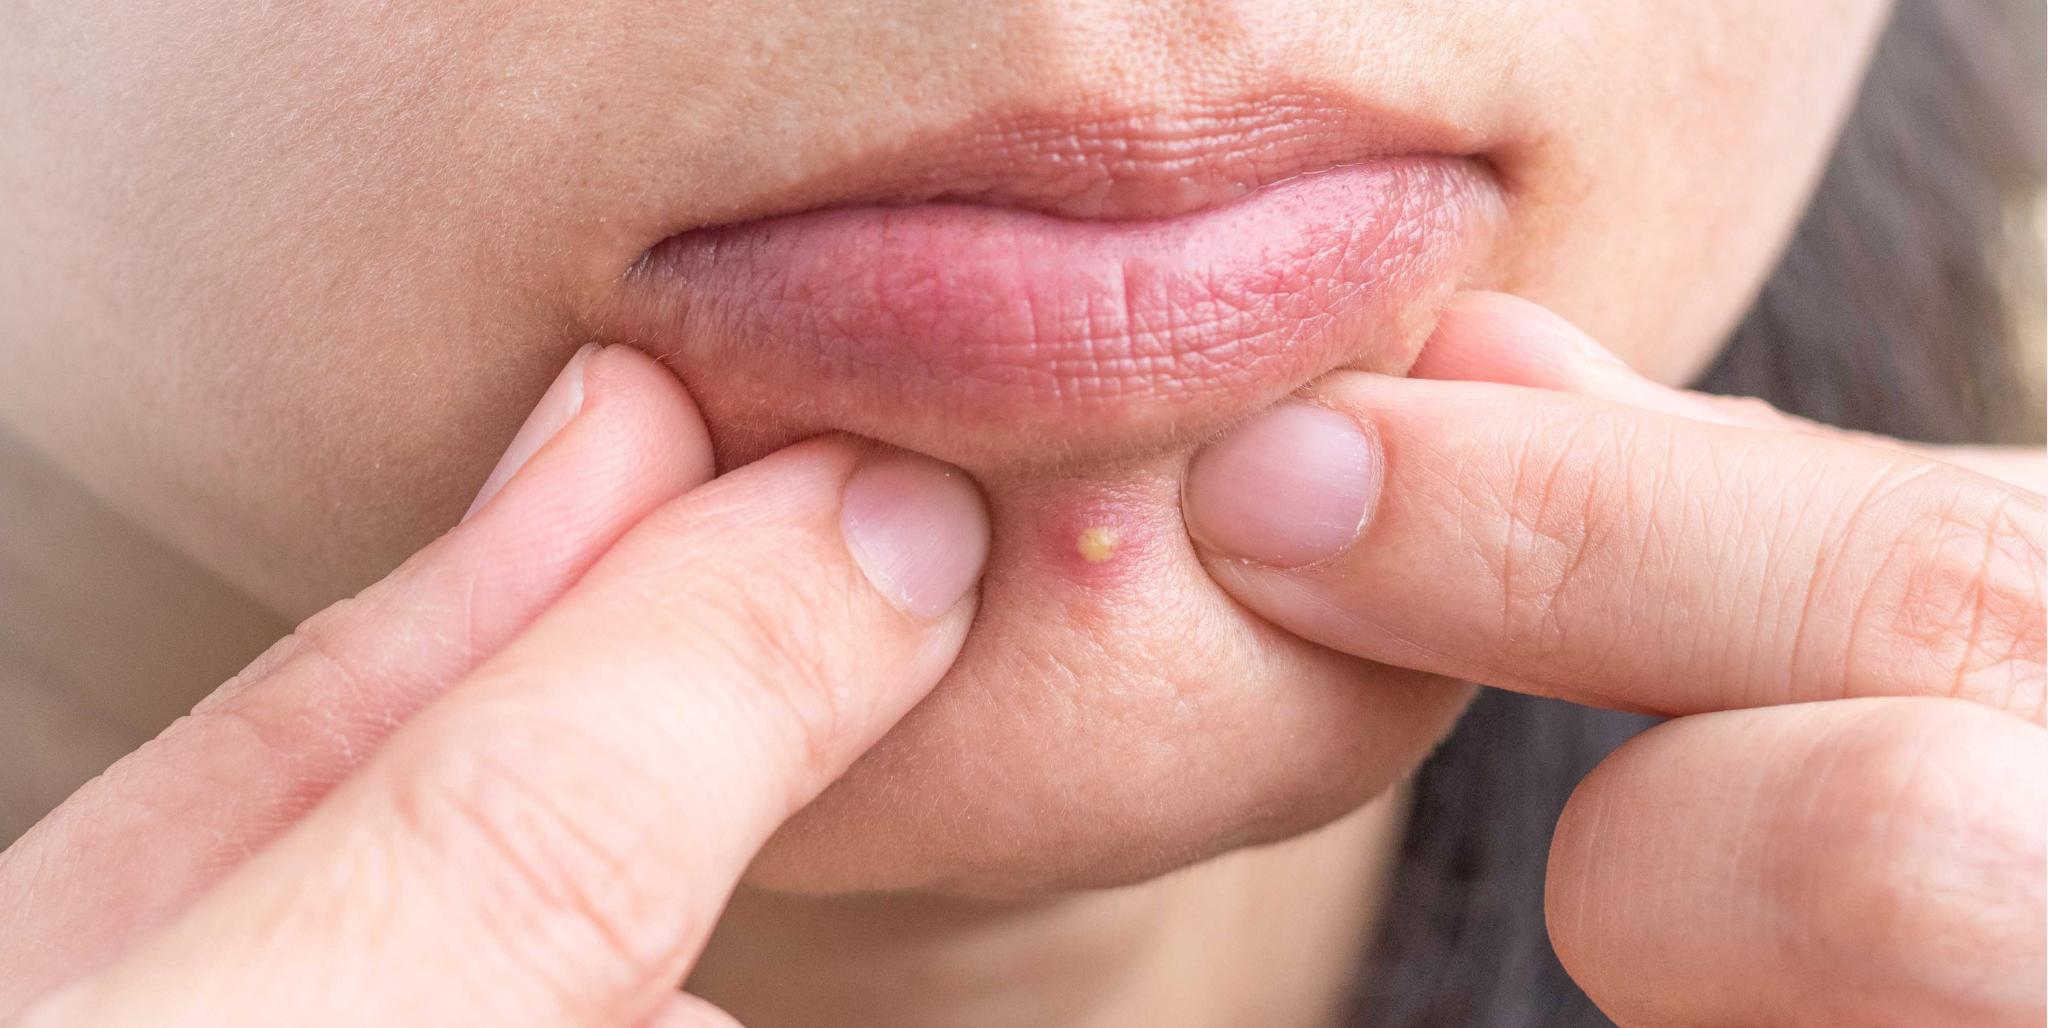 Chin acne: 5 ways to deal with a spotty chin and what causes it